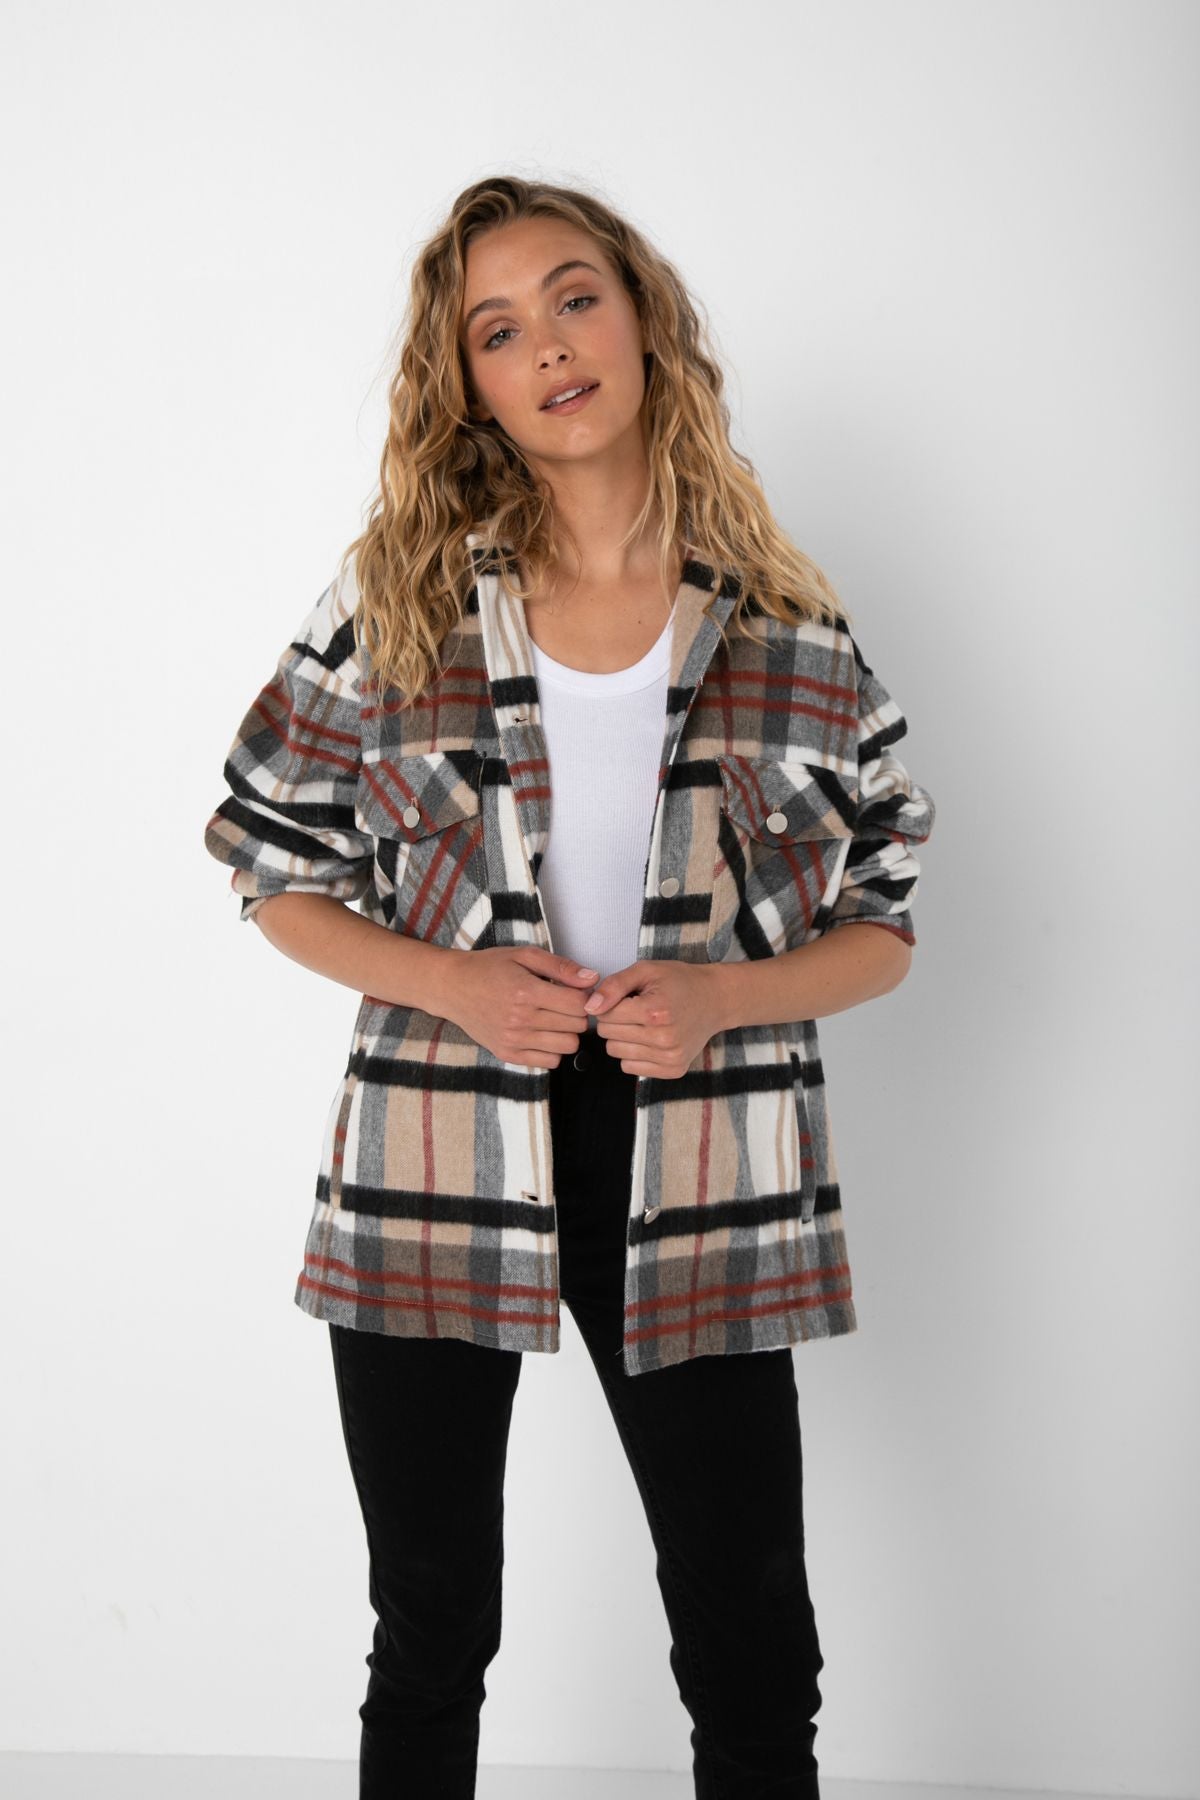 Tall Curled Blonde Caucasian female wearing a Two Squared Front Pockets  Buttoned Down Shacket  Lightweight  Turndown collar  Casual Rolled Up Sleeves  Relax fit  Long sleeve  Flannel Jacket  Oversized plaid jacket Short Fall Jackets paired with black denim jeans